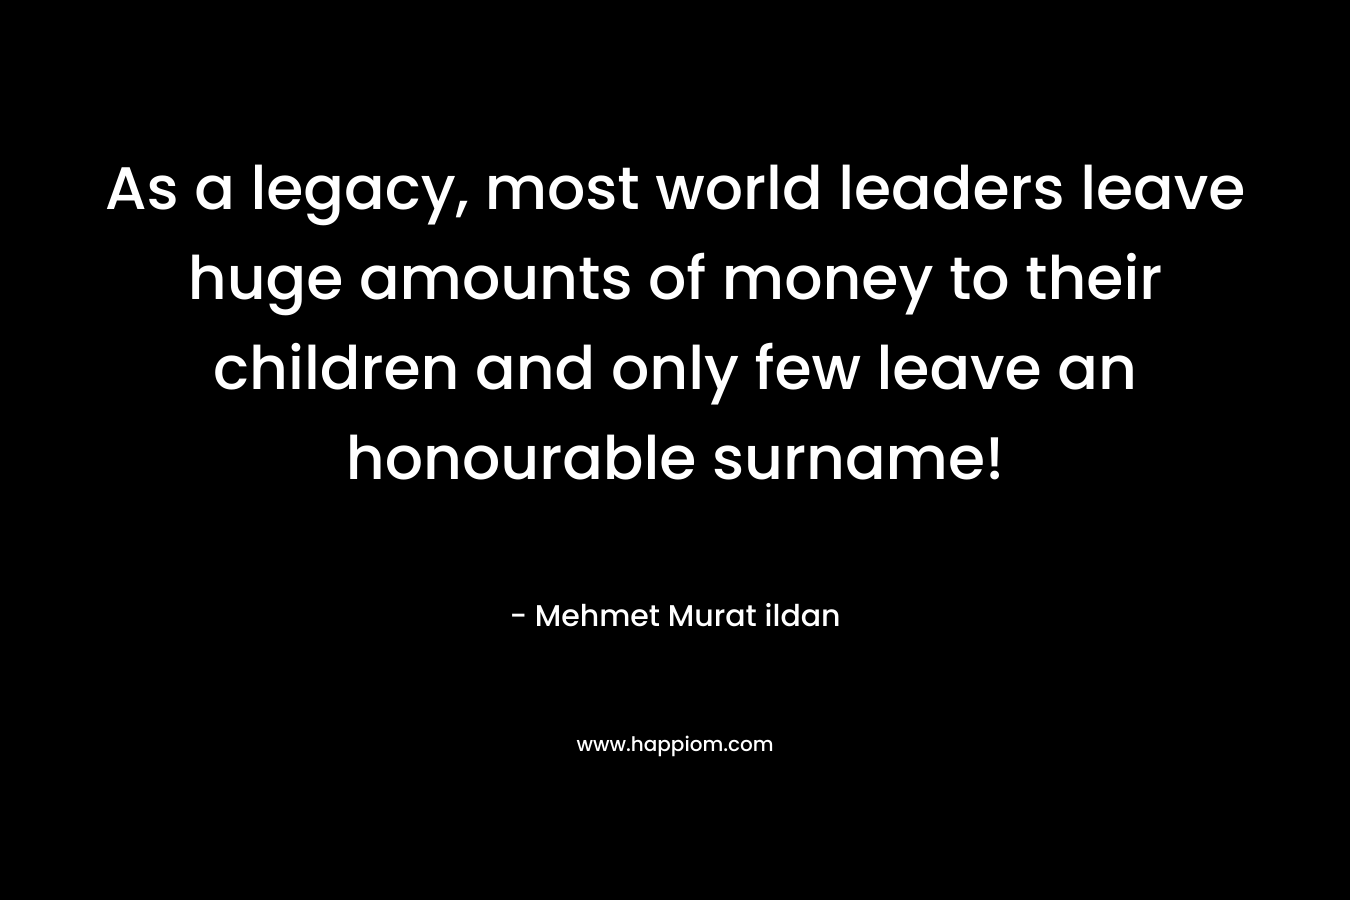 As a legacy, most world leaders leave huge amounts of money to their children and only few leave an honourable surname!